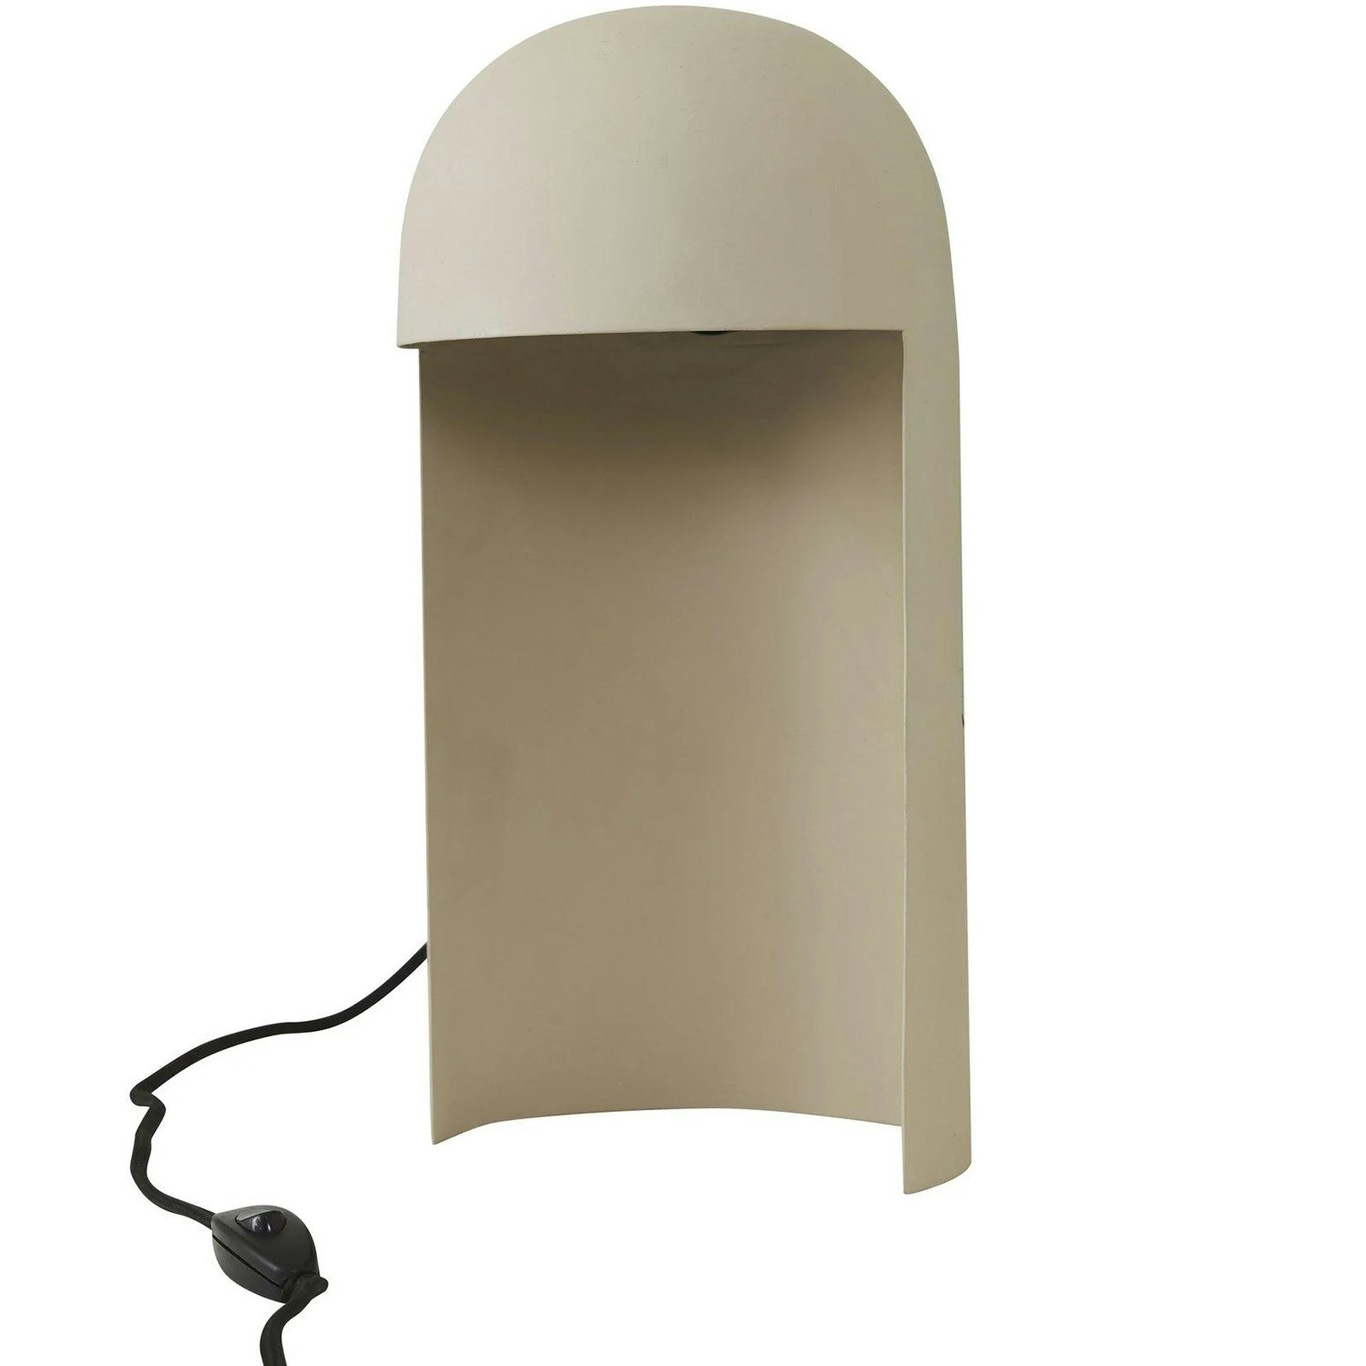 Lux Table Lamp, Beige